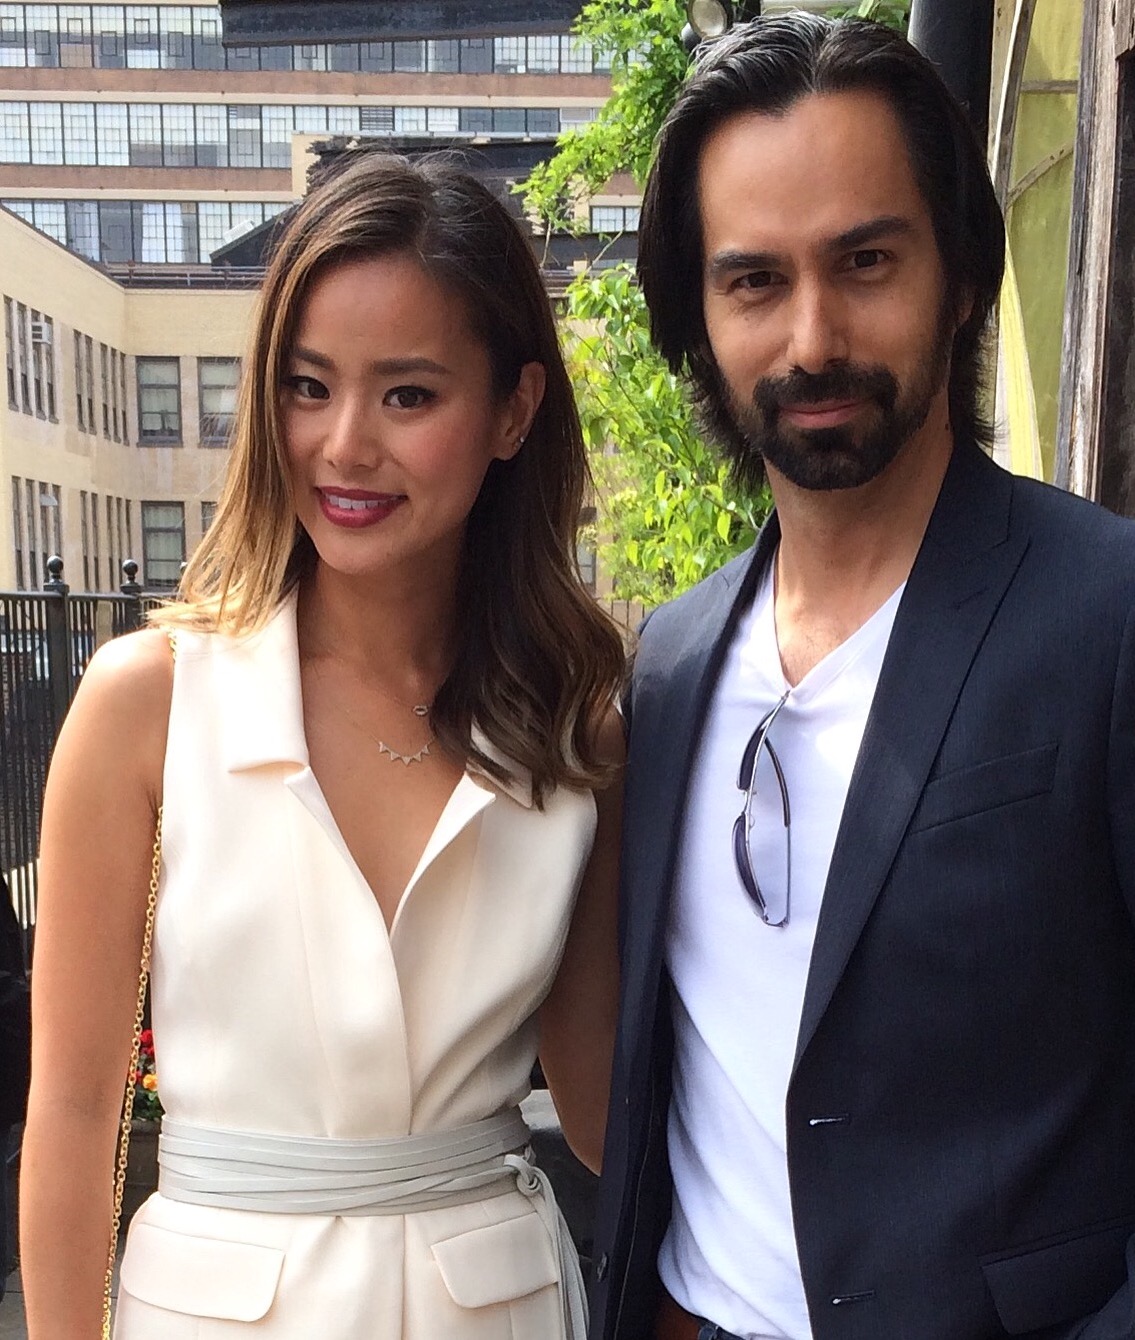 Jamie Chung and Mack Kuhr at the Olevolos Project Benefit Event in NYC